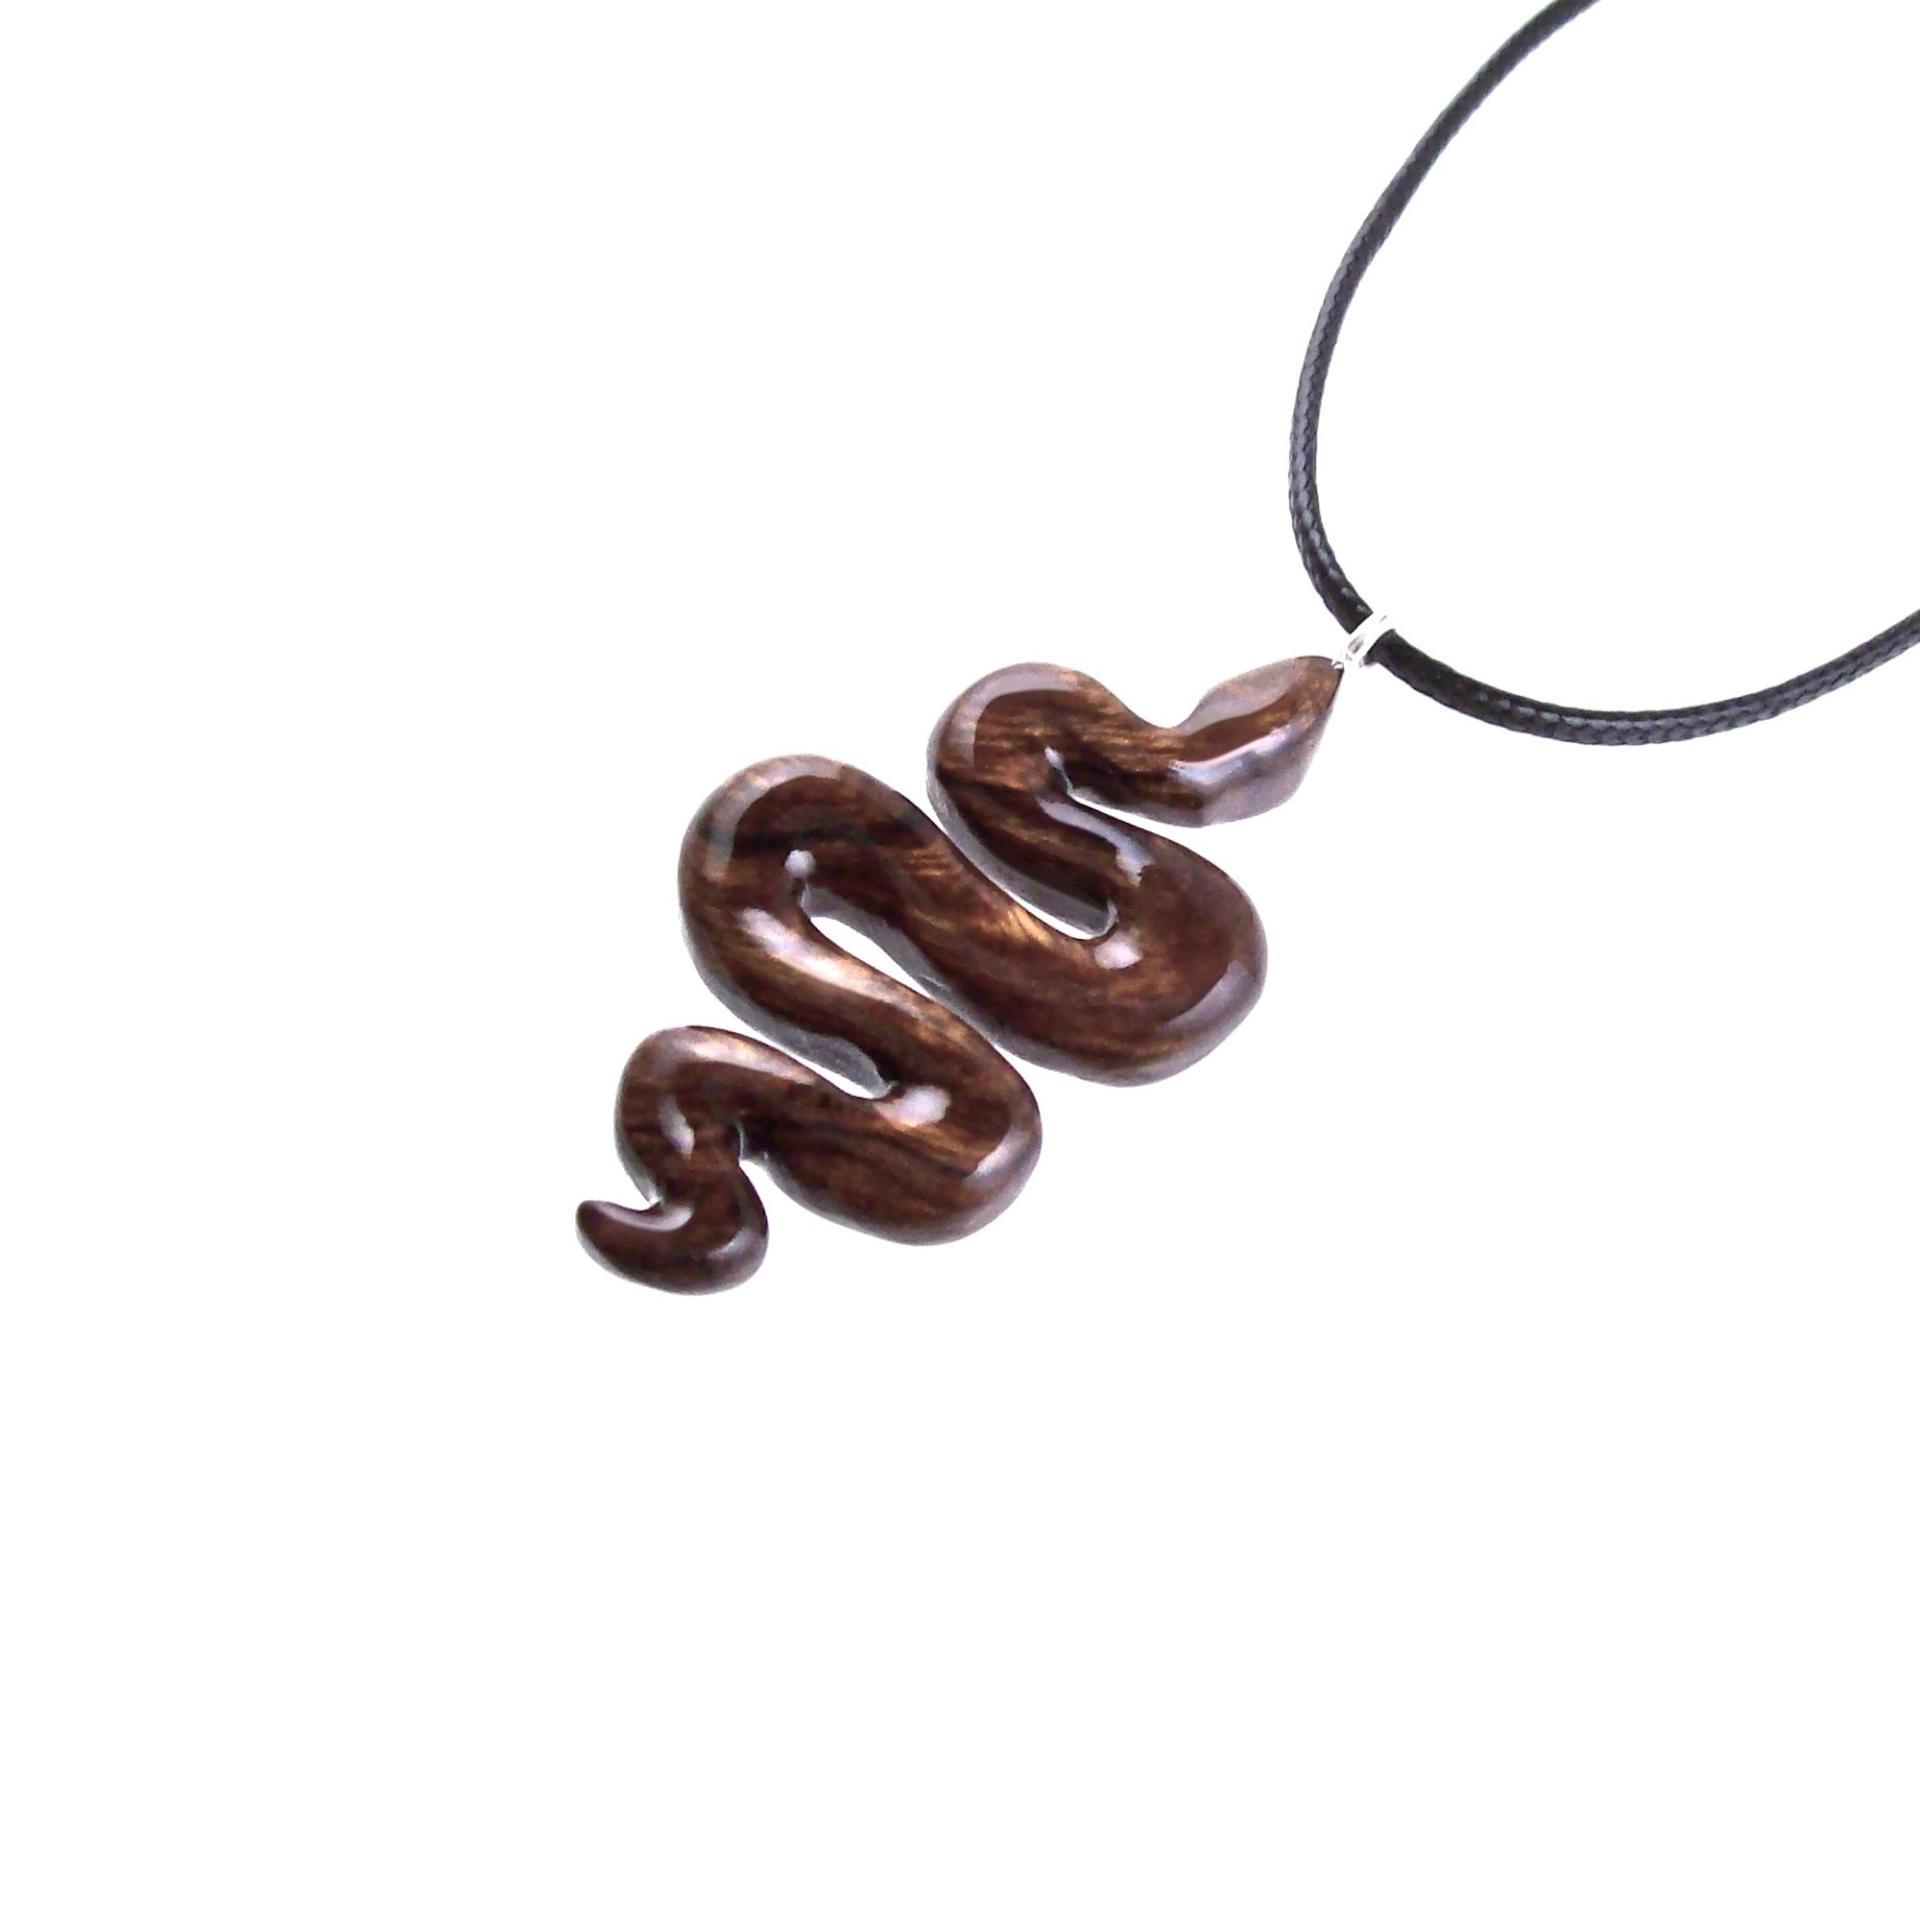 Hand Carved Wooden Snake Pendant, Snake Necklace, Wood Reptile Pendant, Totem Spirit Animal Serpent Jewelry Gift for Him Her